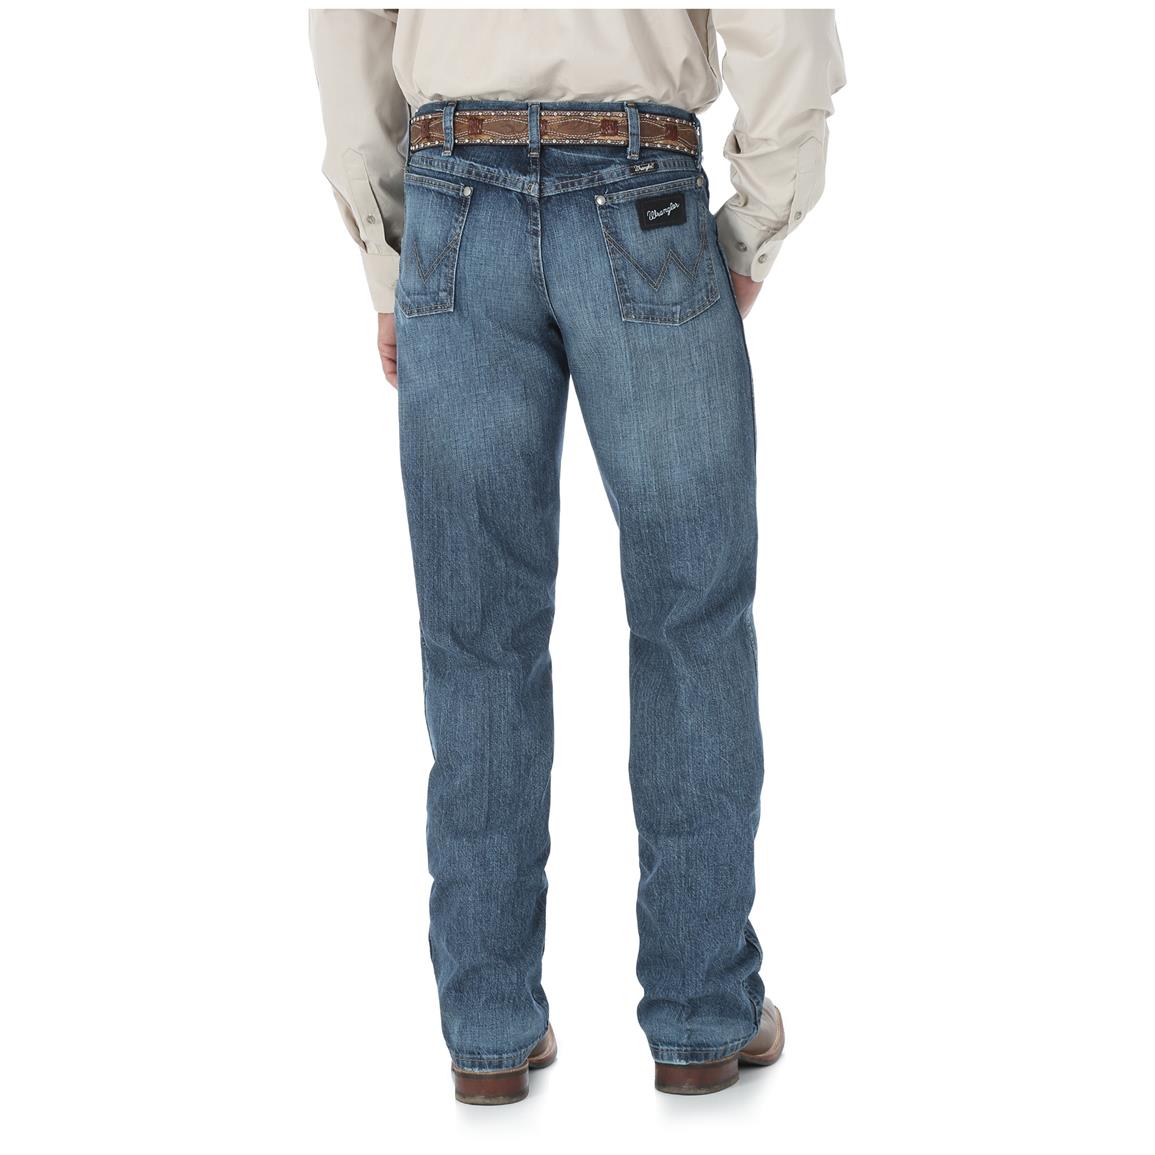 Guide Gear Men's Flannel-Lined Denim Jeans - 221527, Insulated Pants ...